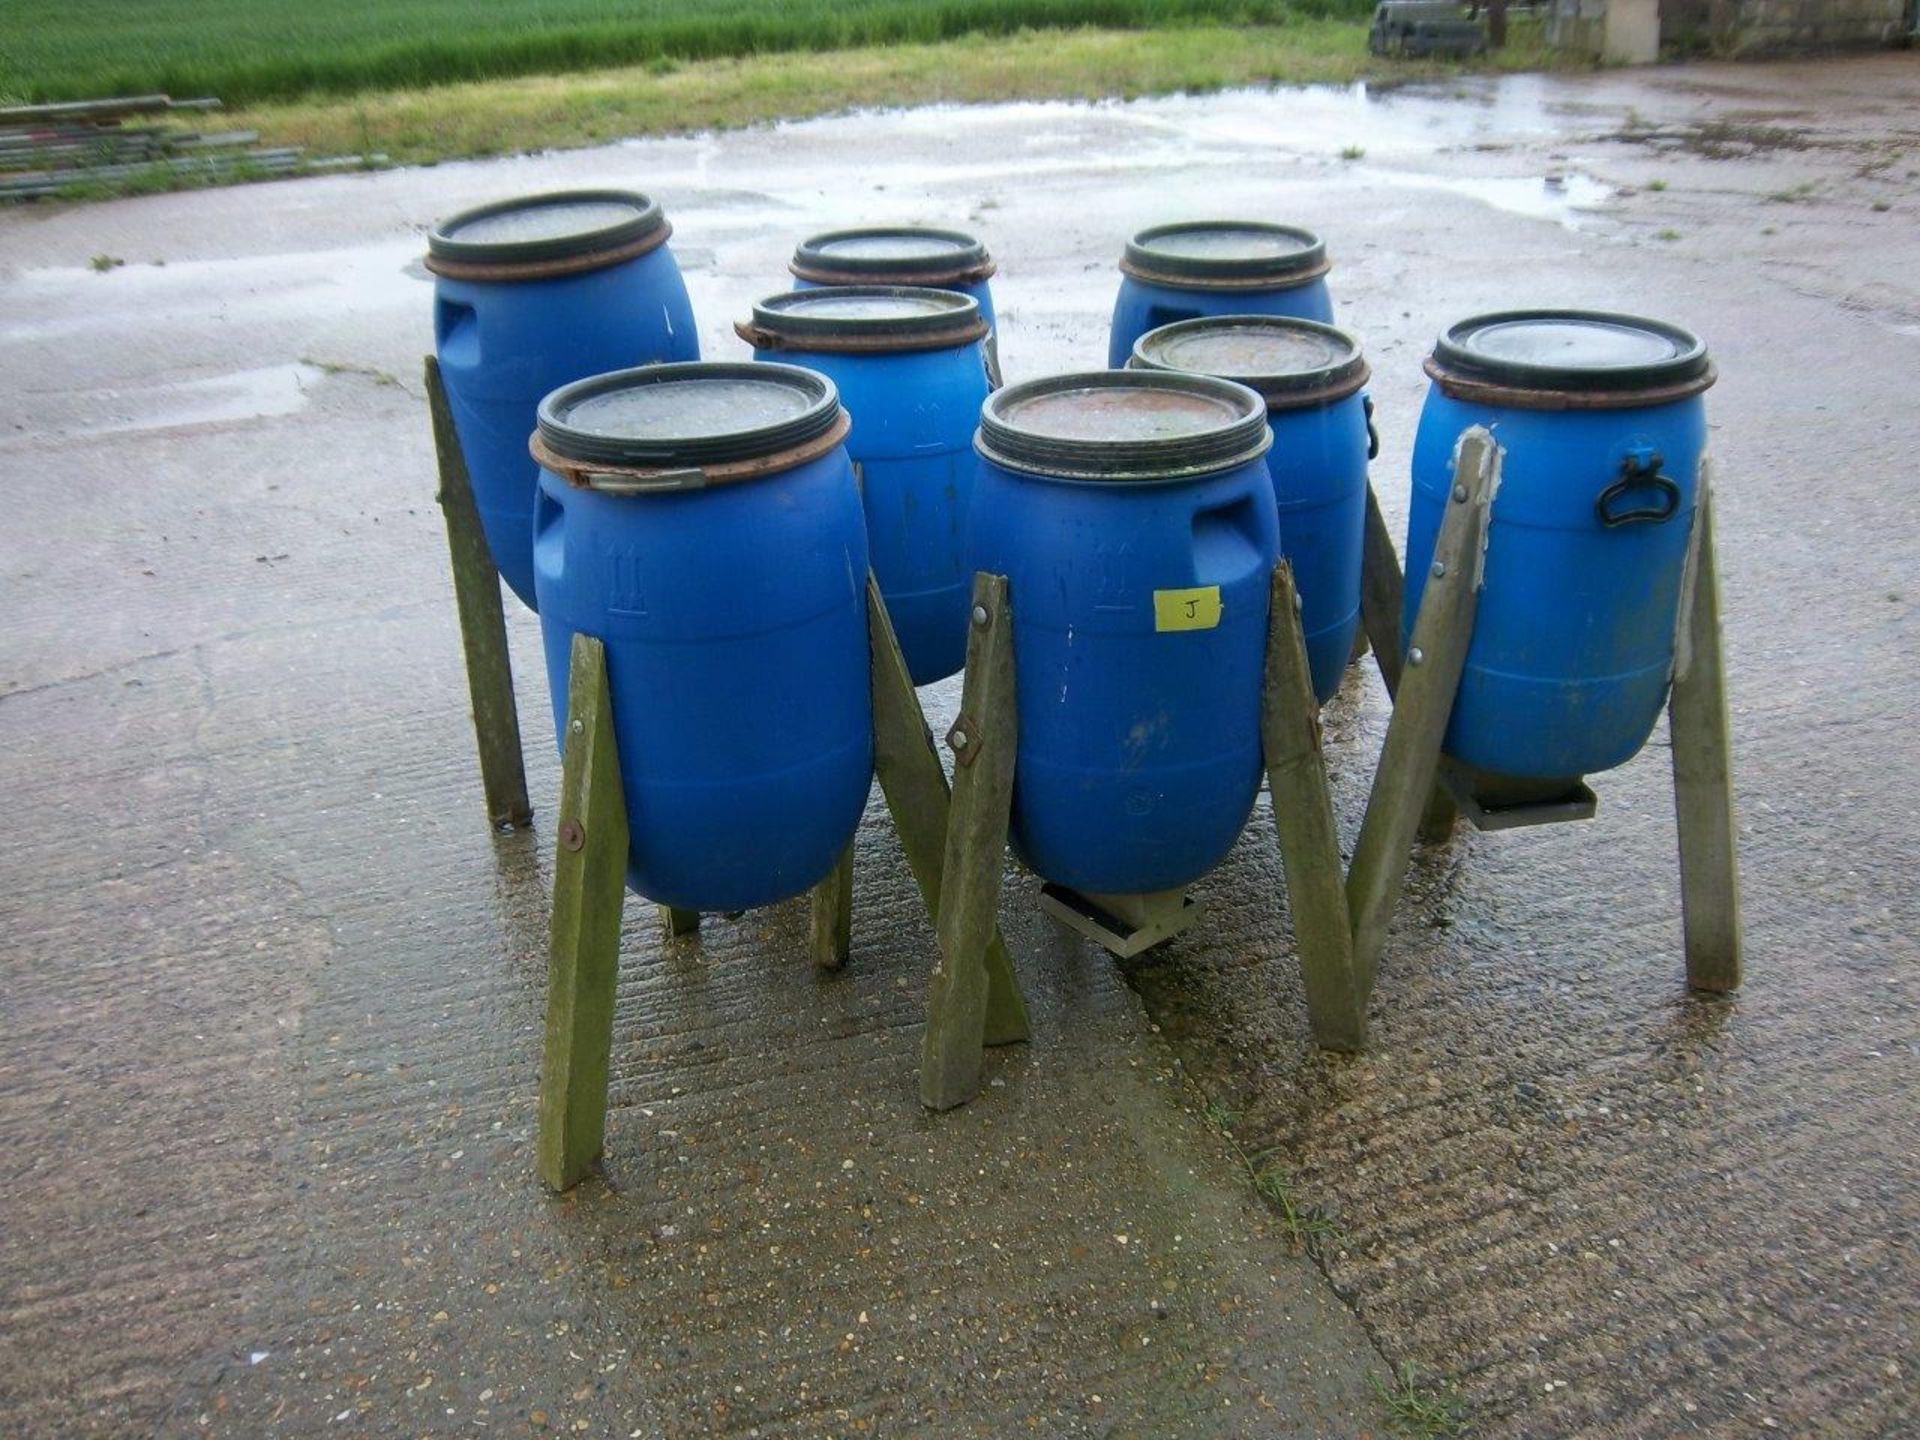 8 x Pheasant Barrel Feeders (40kg approx.) 4 with Springs & 4 with Pans.